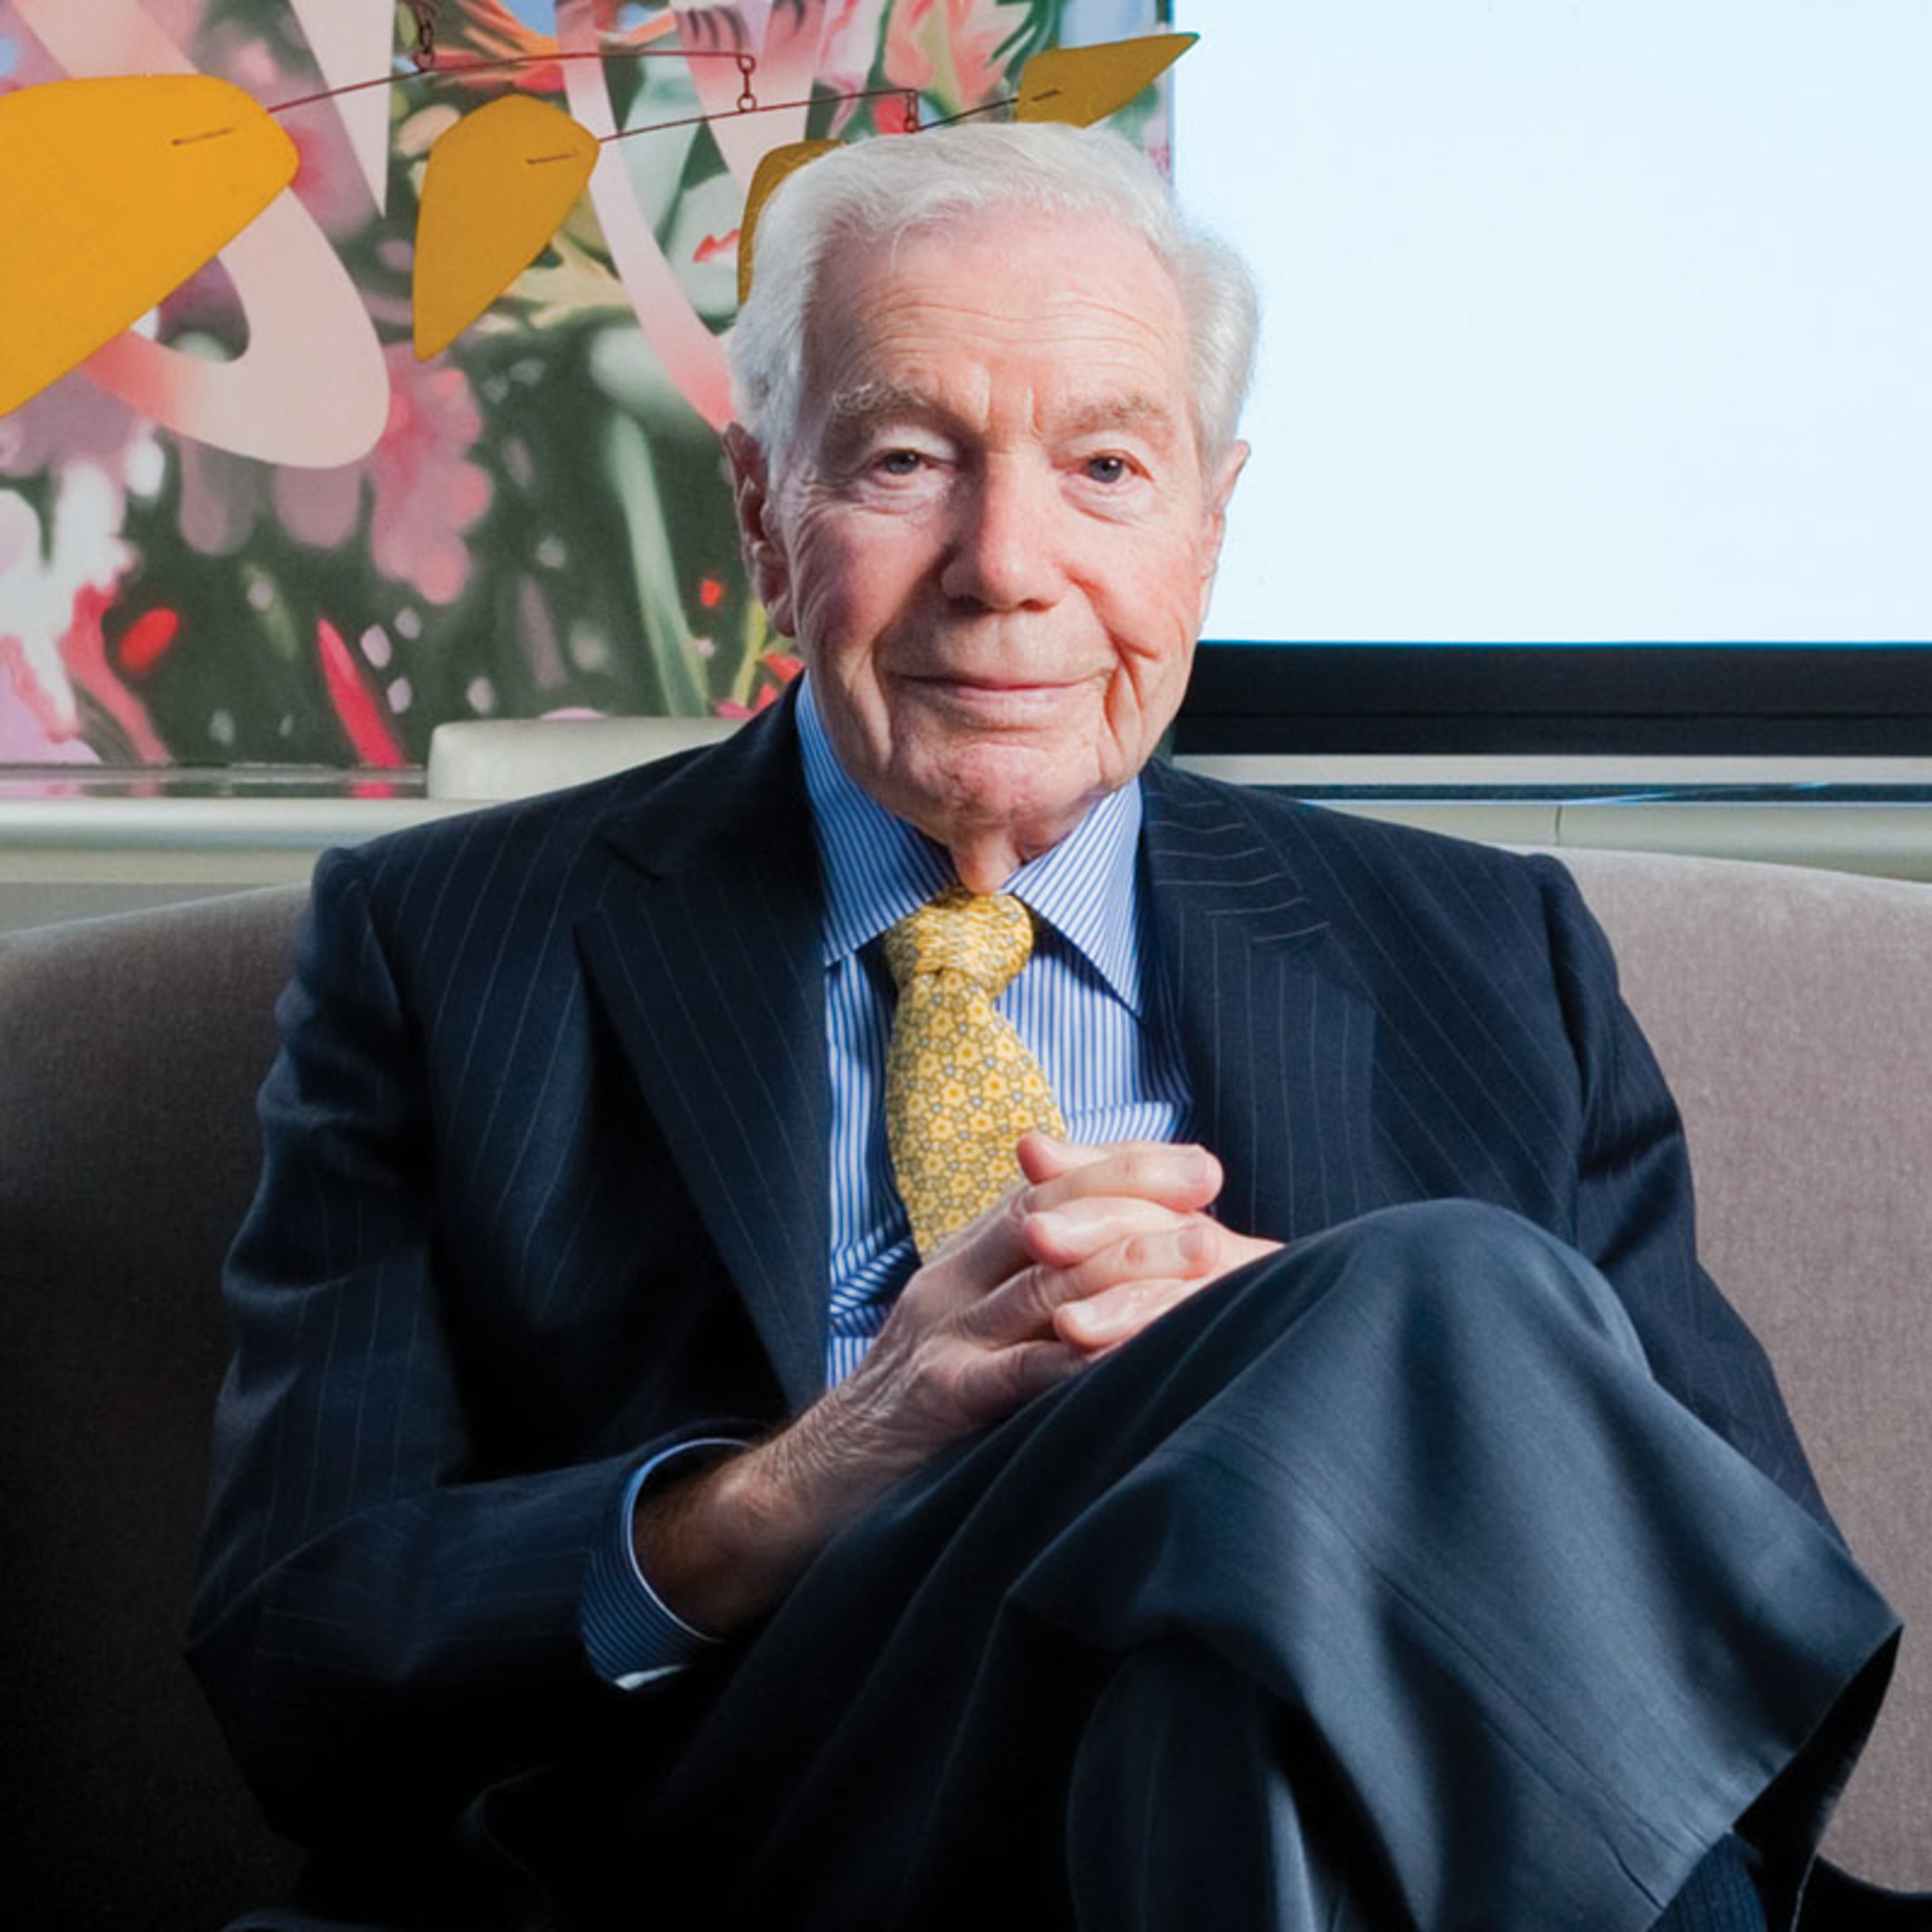 Jerome H. Stone founded the Alzheimer's Association, generating much-needed research and resources for families facing the disease.